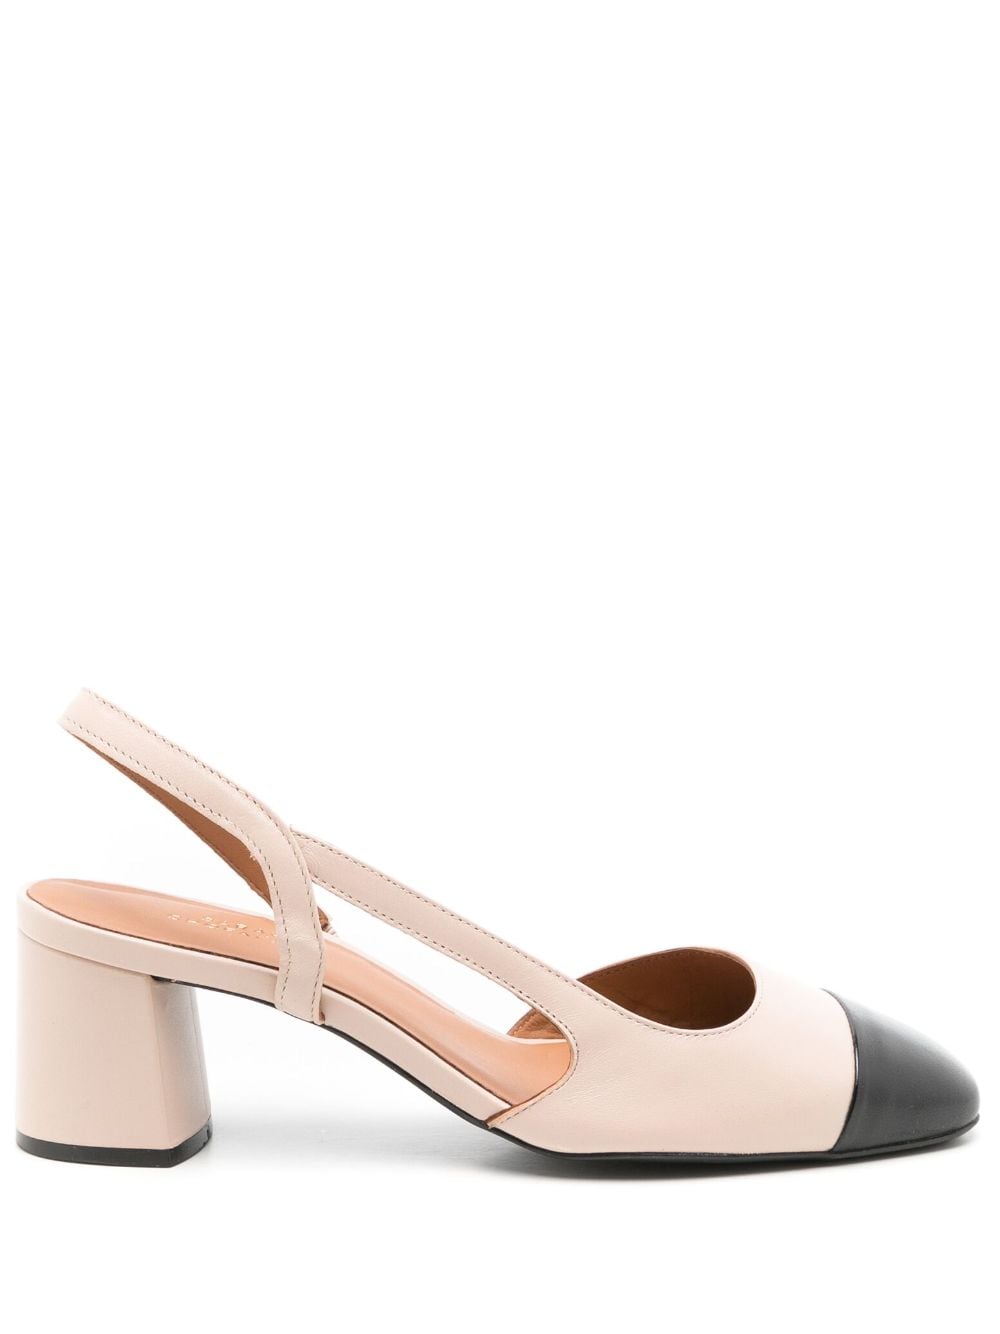 Sarah Chofakian Coucou 65mm Slingback Pumps In Neutrals